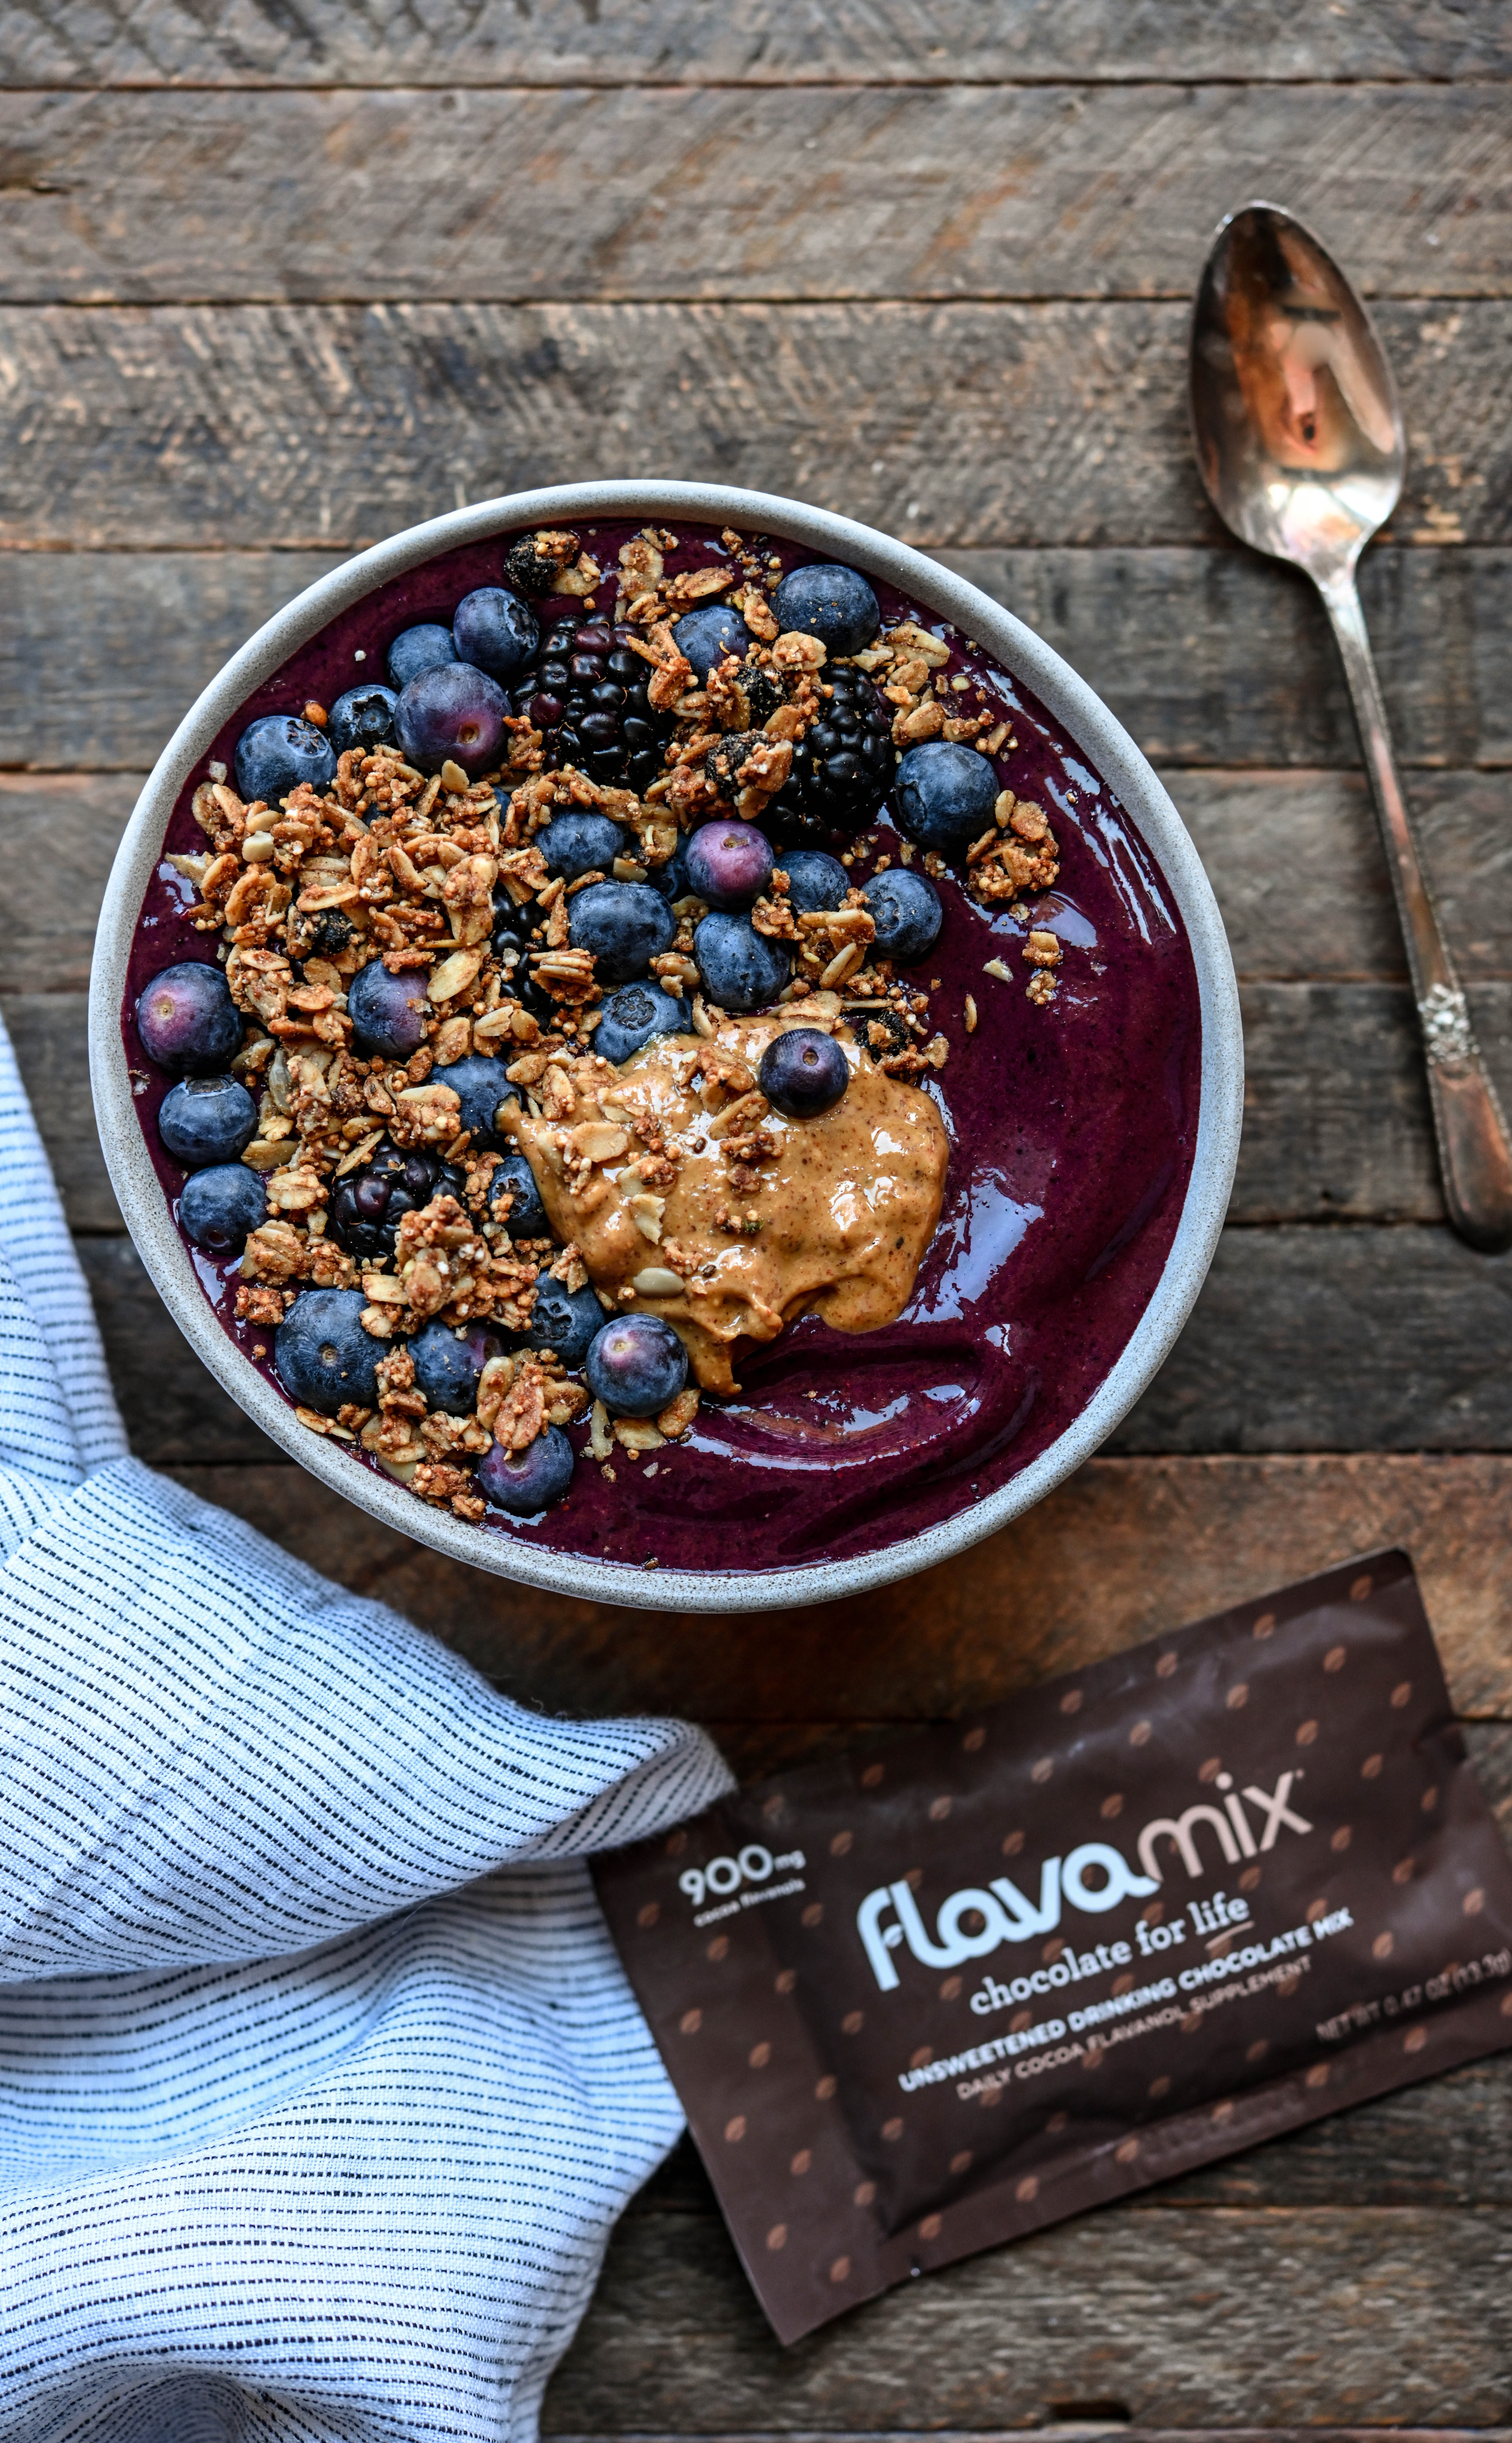 Overhead view of blueberry chocolate smoothie bowl with fresh blueberries, granola and almond butter on wood background